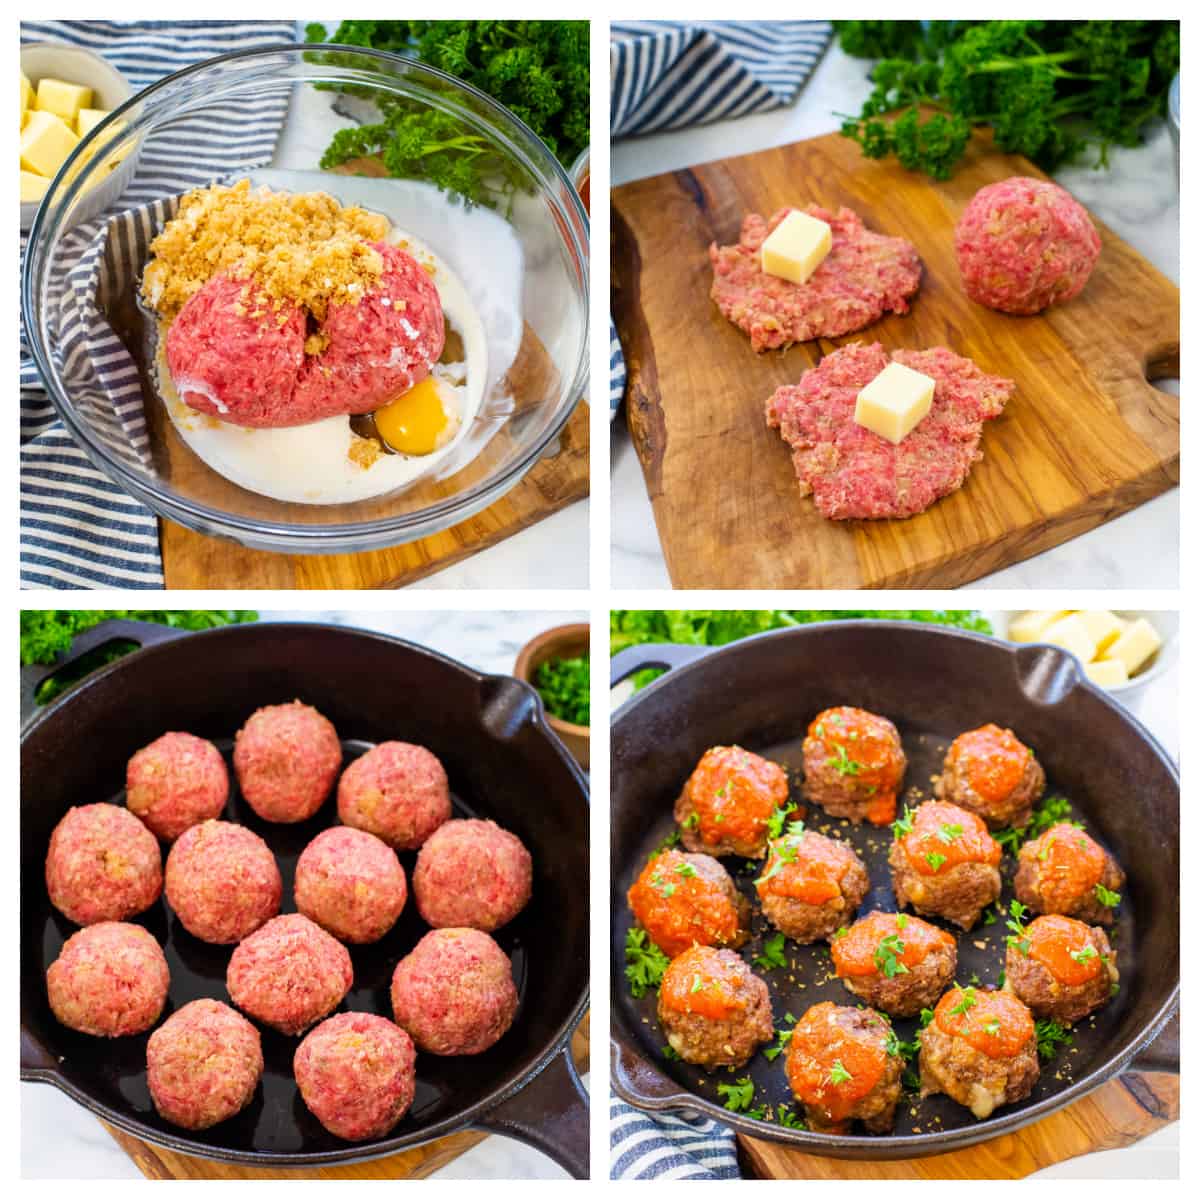 Collage showing how to make mozzarella stuffed meatballs.